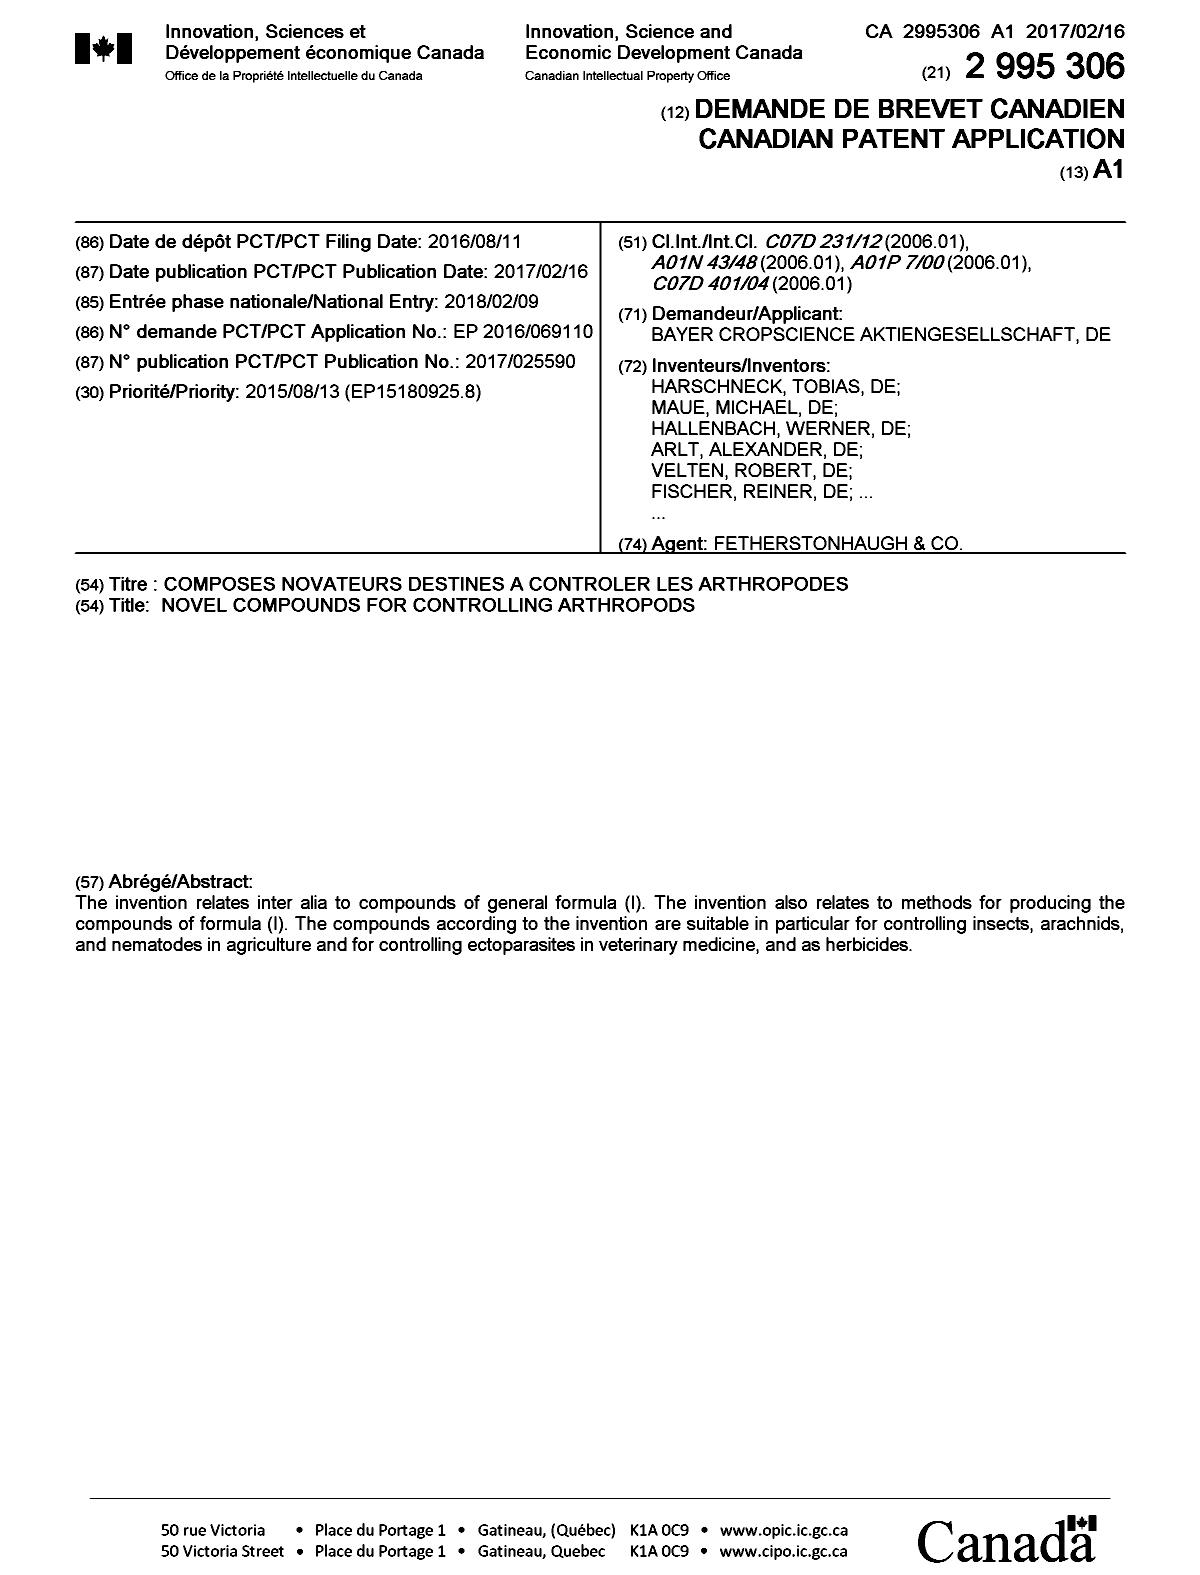 Canadian Patent Document 2995306. Cover Page 20180329. Image 1 of 2